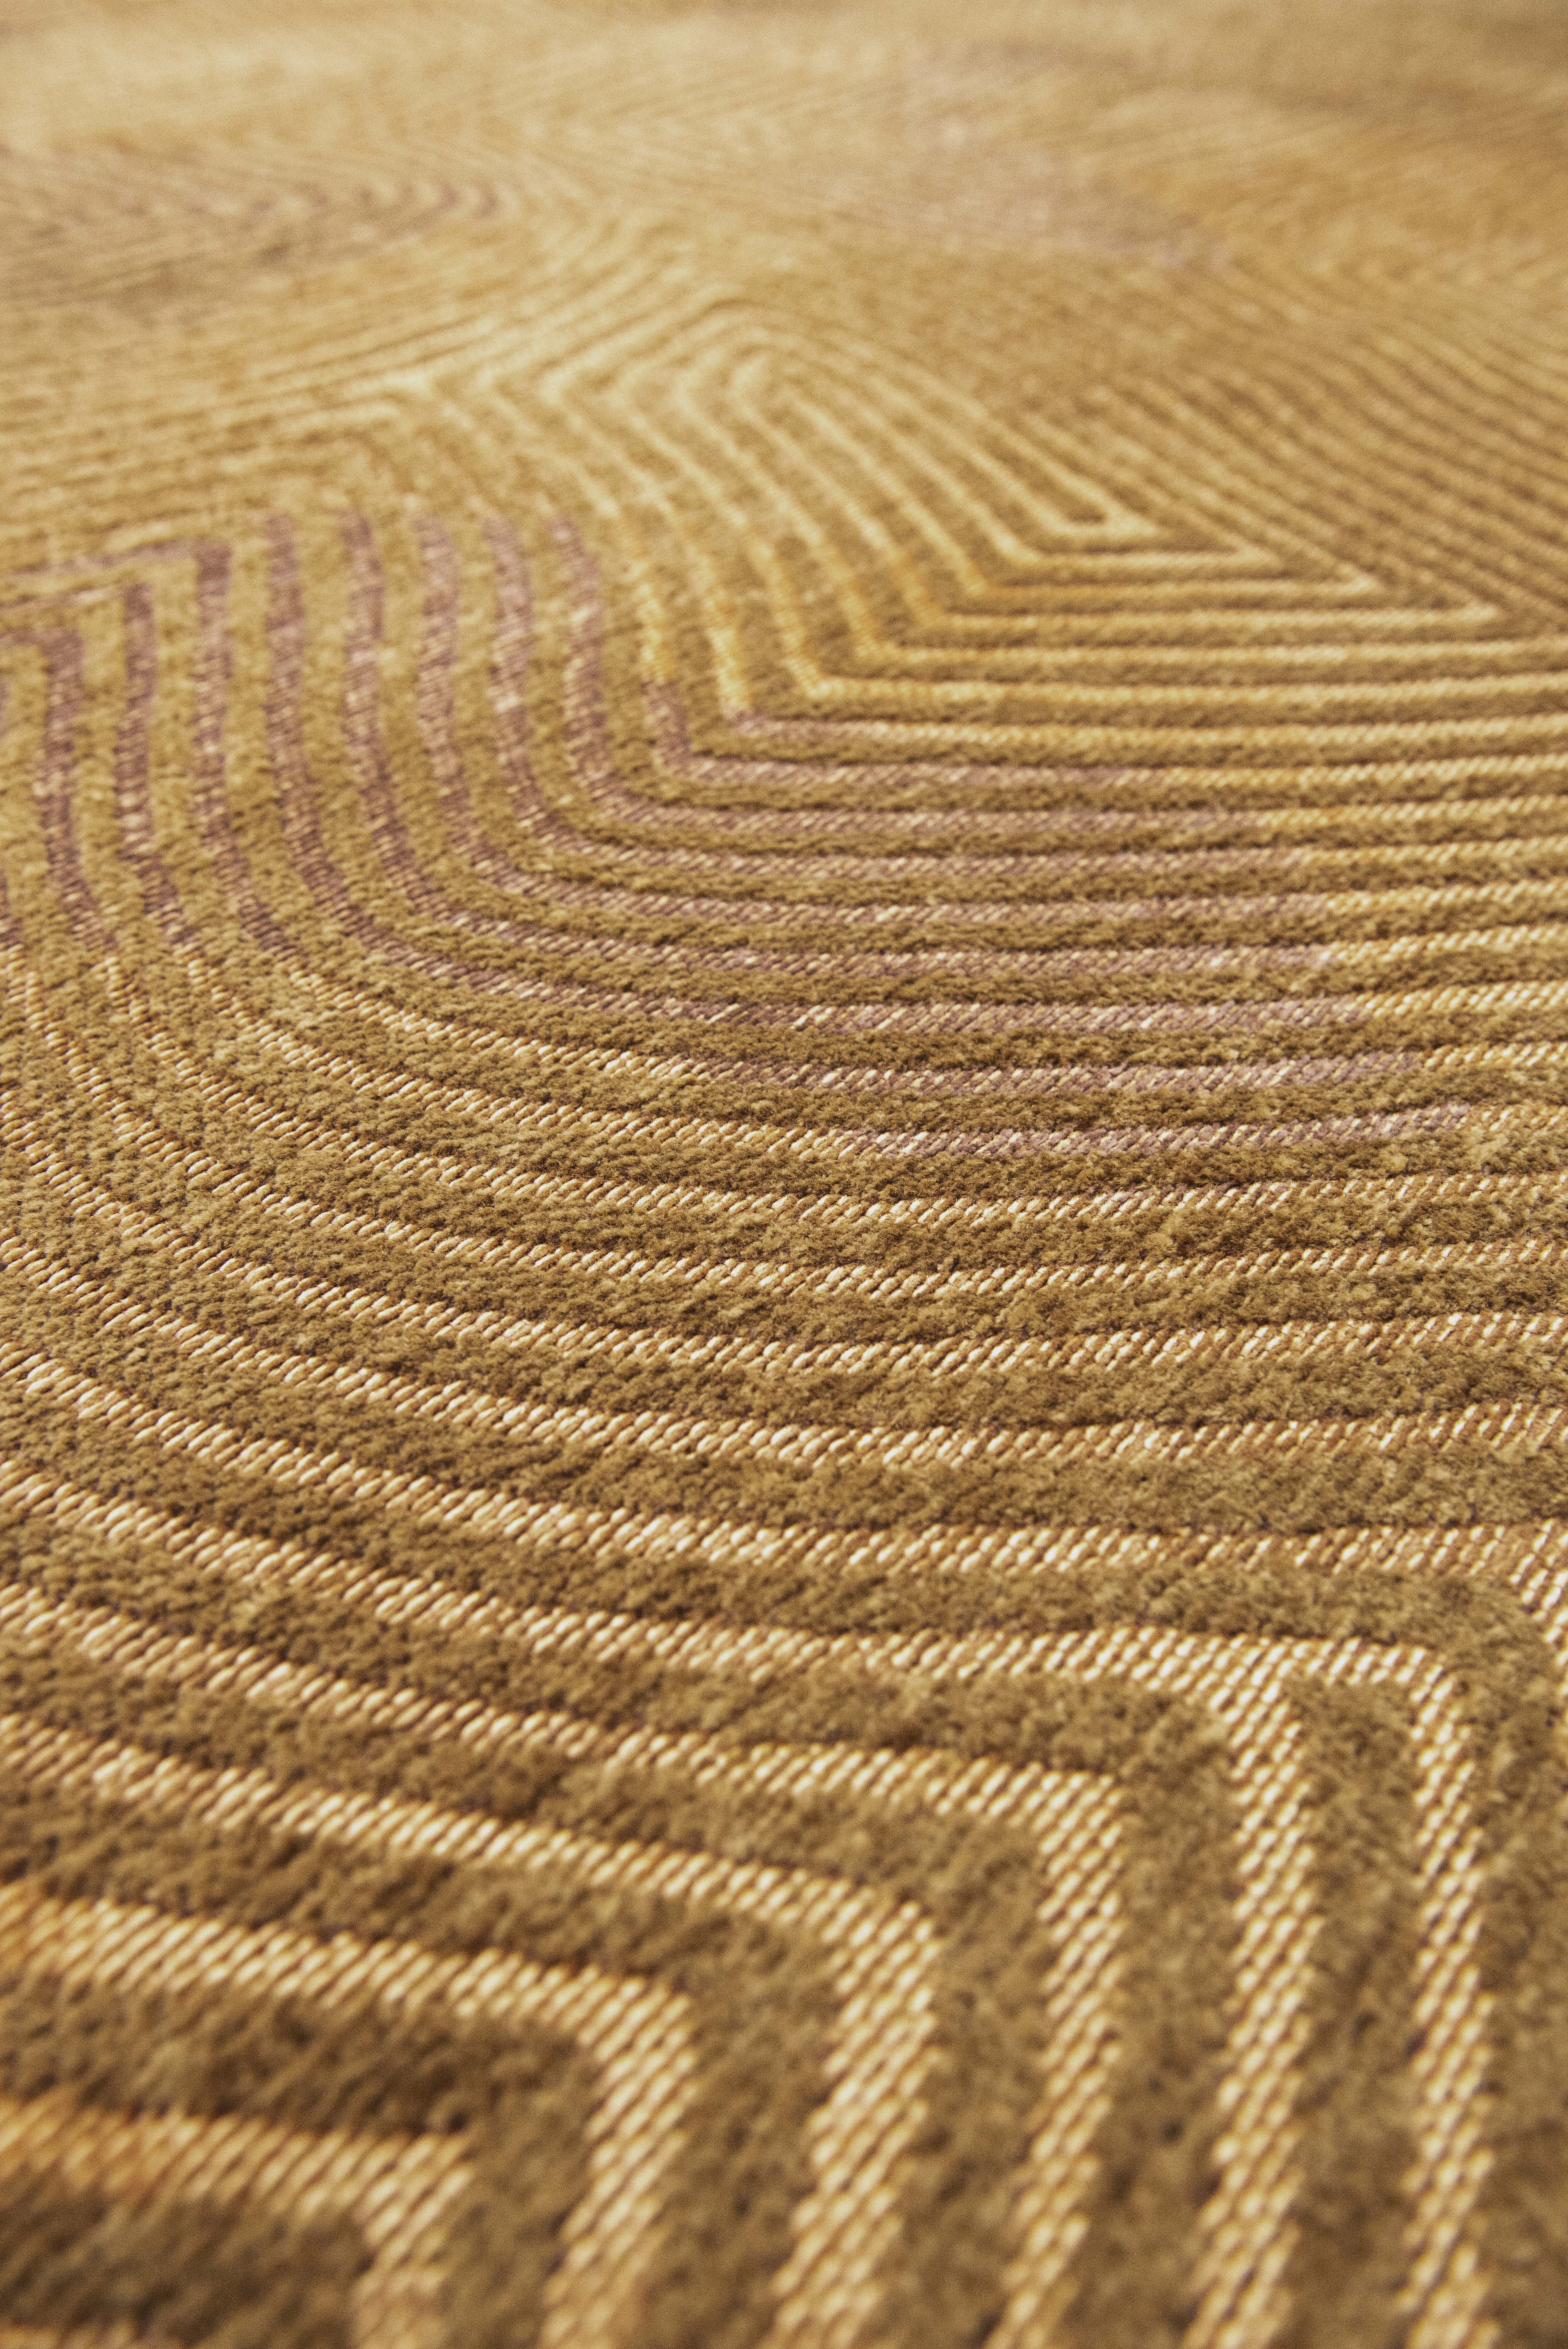 Gold flatweave area rug with organic, textured pattern